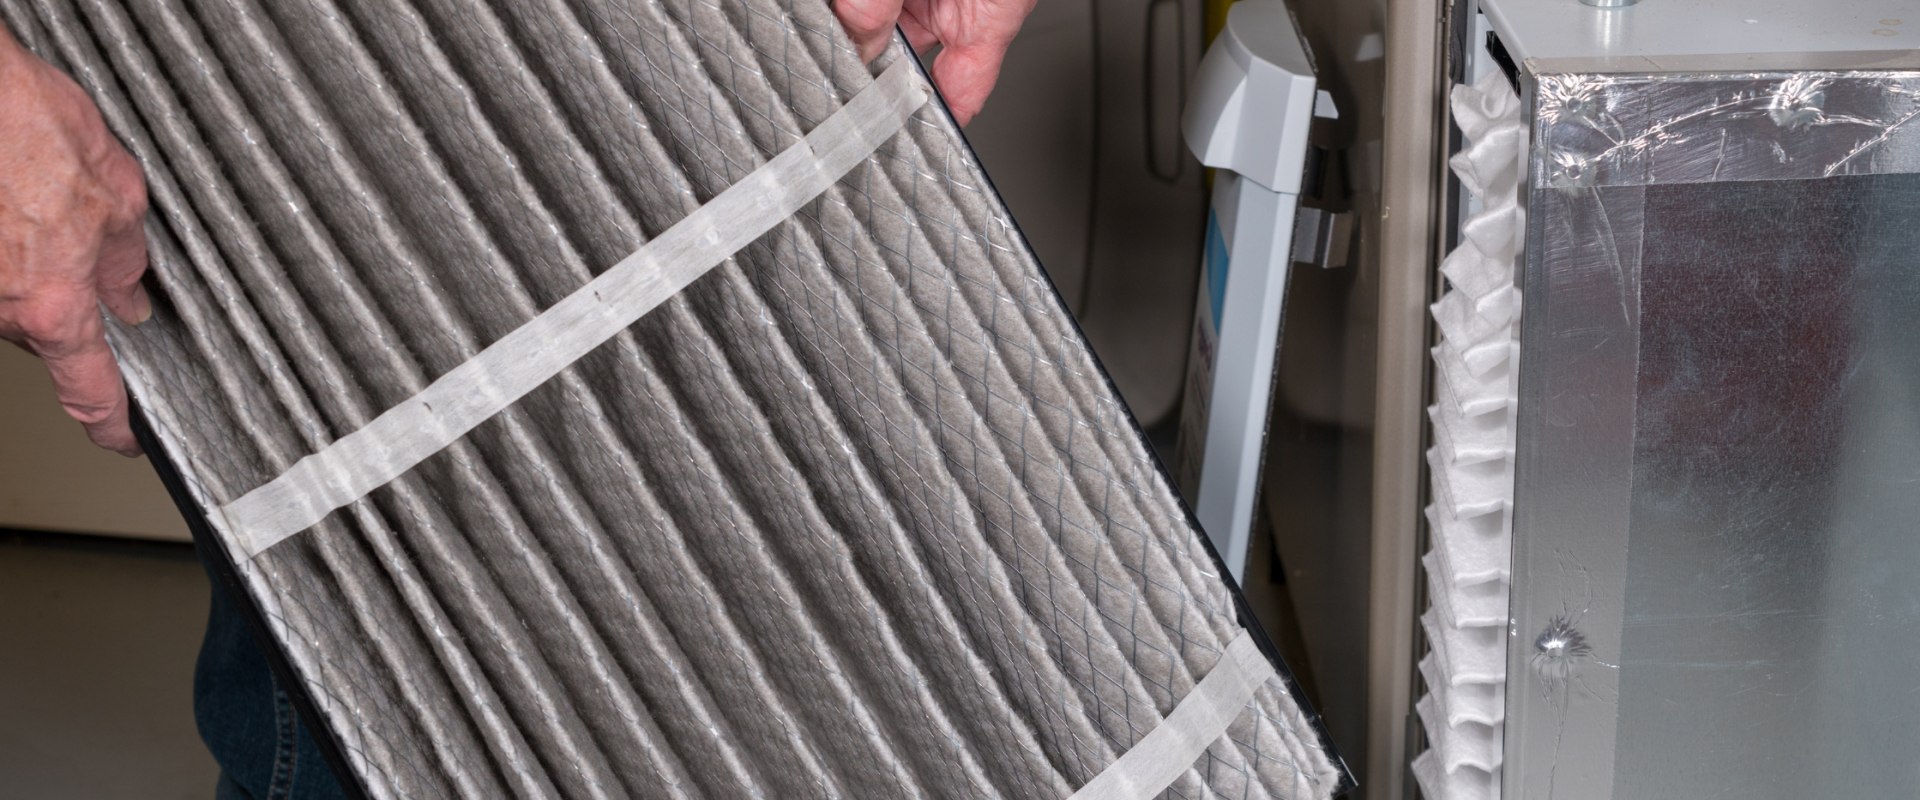 How to Choose the Right Size Furnace Filter